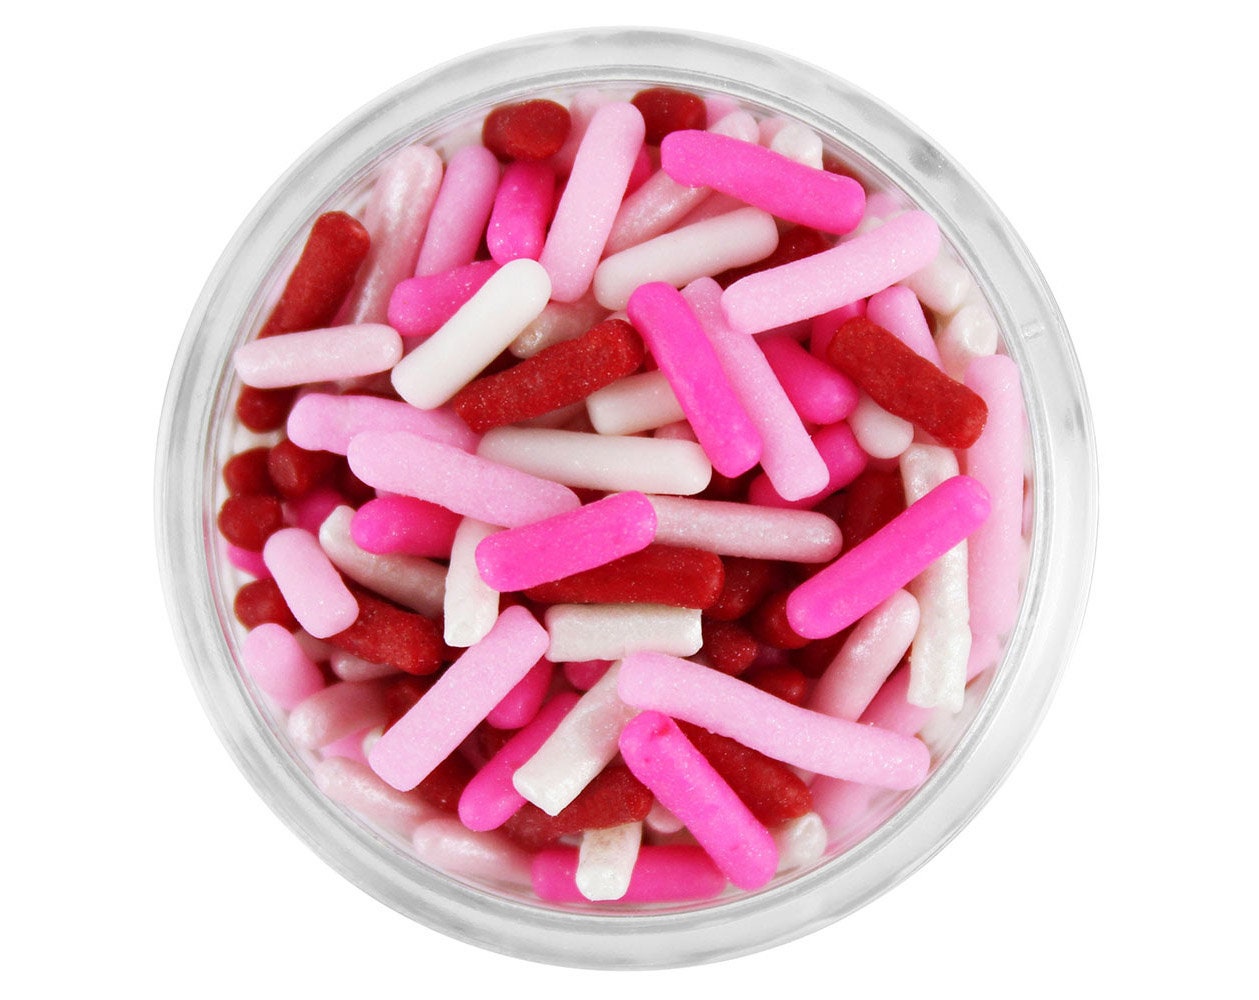 Valentine's Day Jimmies Blend - A Mix Of Classic Soft Jimmies in Red, Pink, Light Pearly White, & White